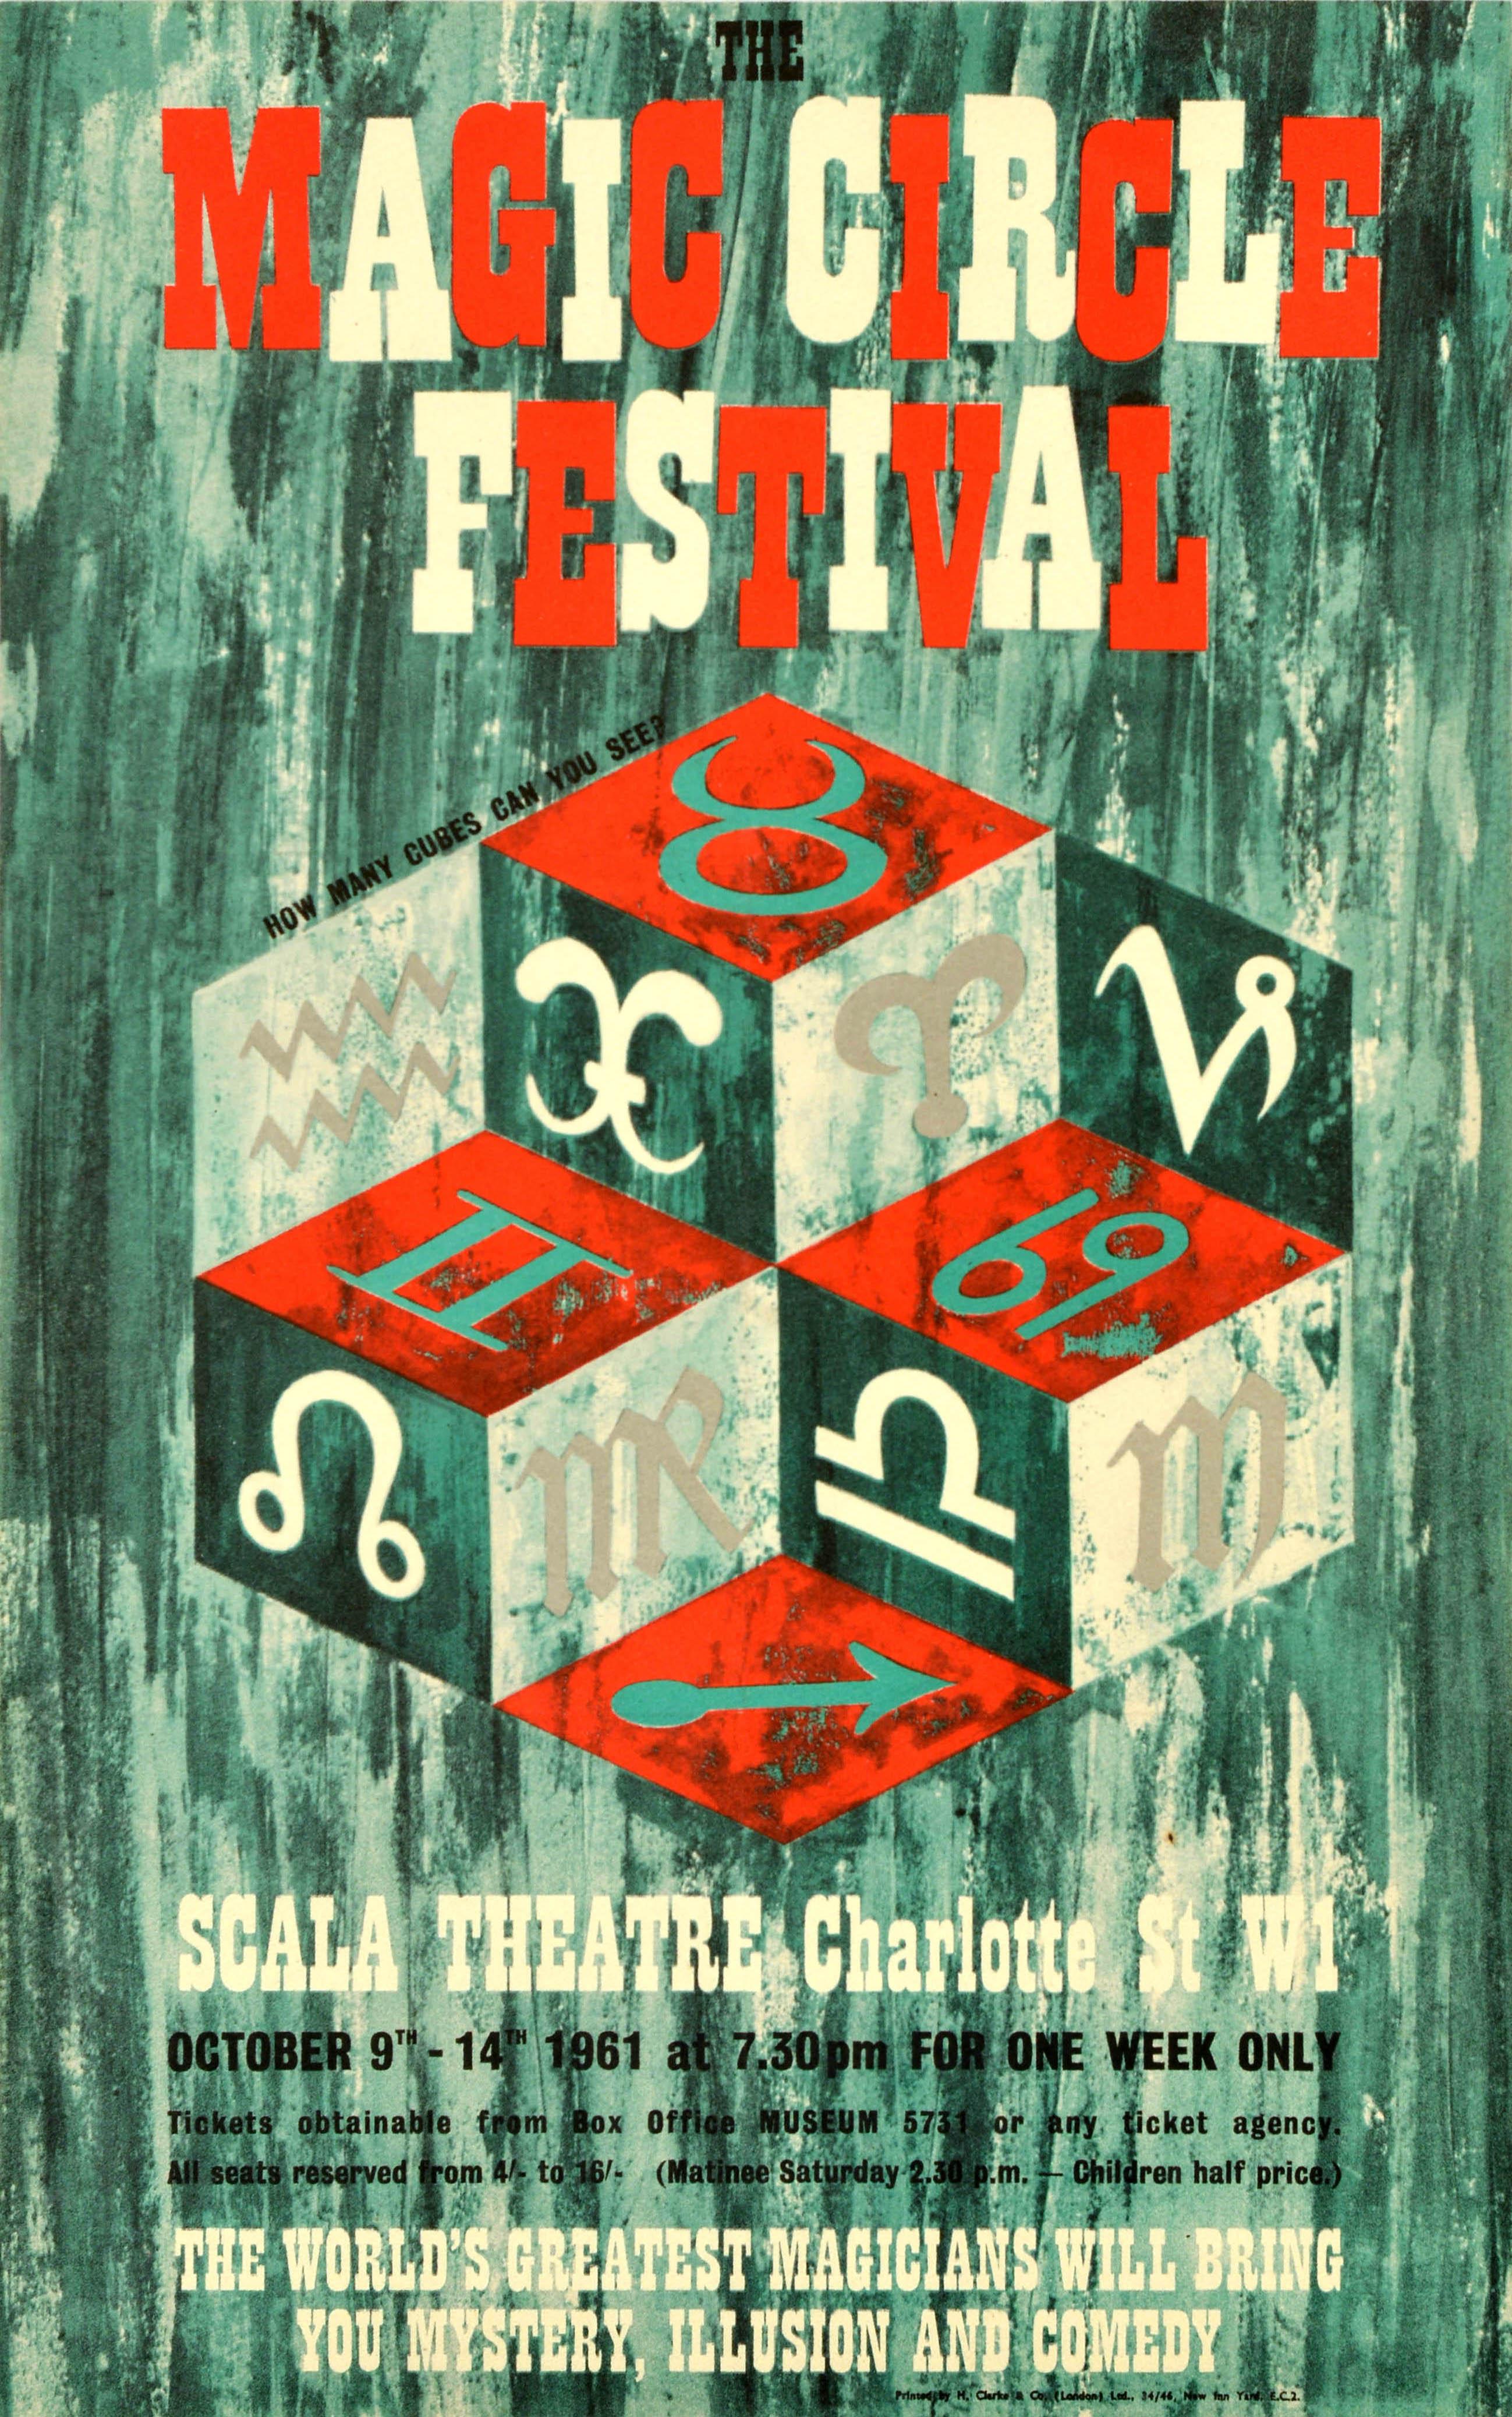 Unknown Print - Original Vintage Advertising Poster Magic Circle Festival Scala Theatre Mystery